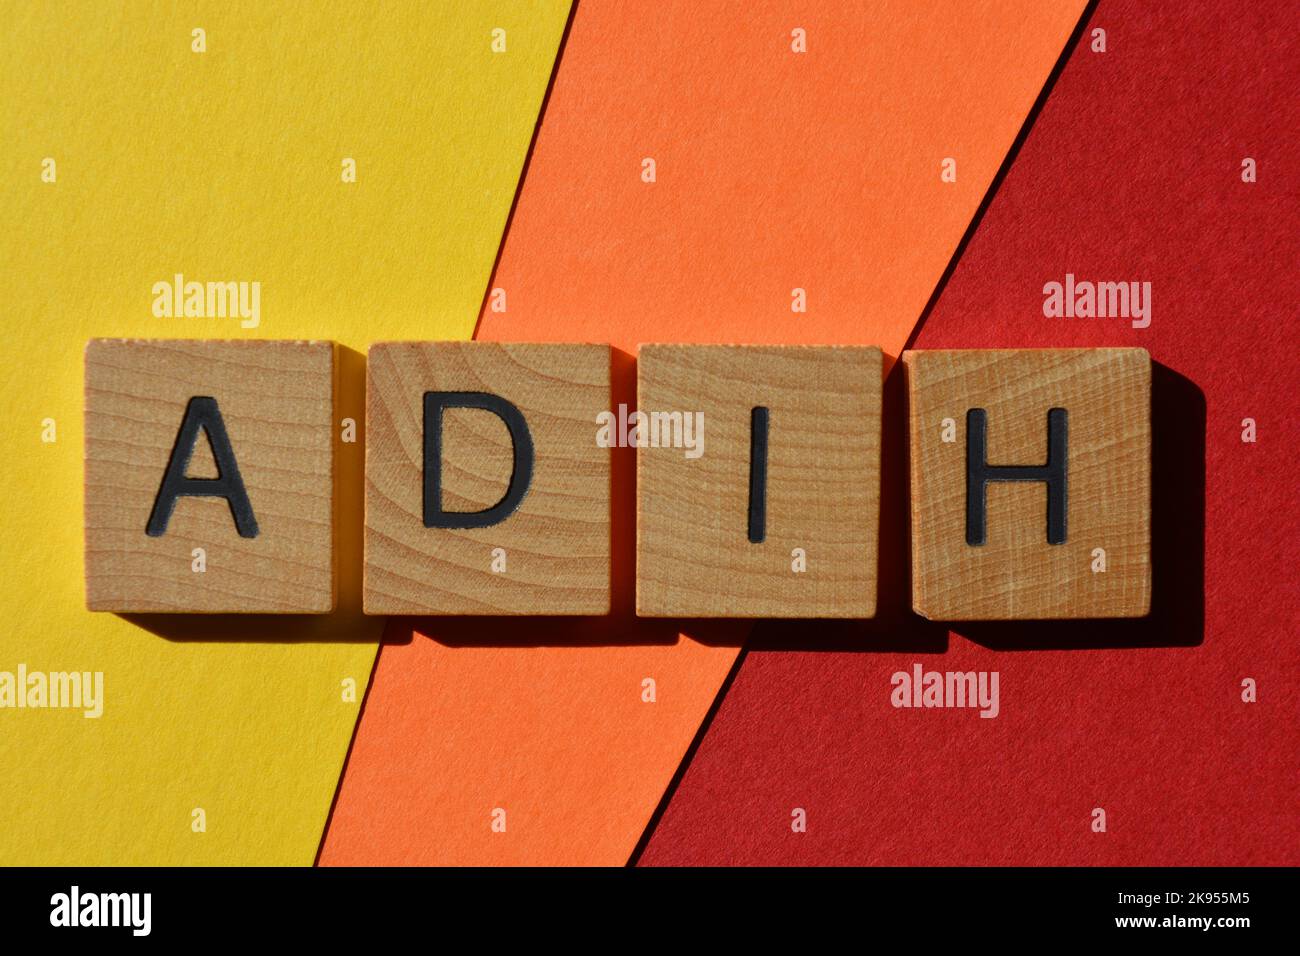 ADIH, abbreviation for Another Day In Hell, slang used is text speak, in wooden alphabet letters isolated on background Stock Photo